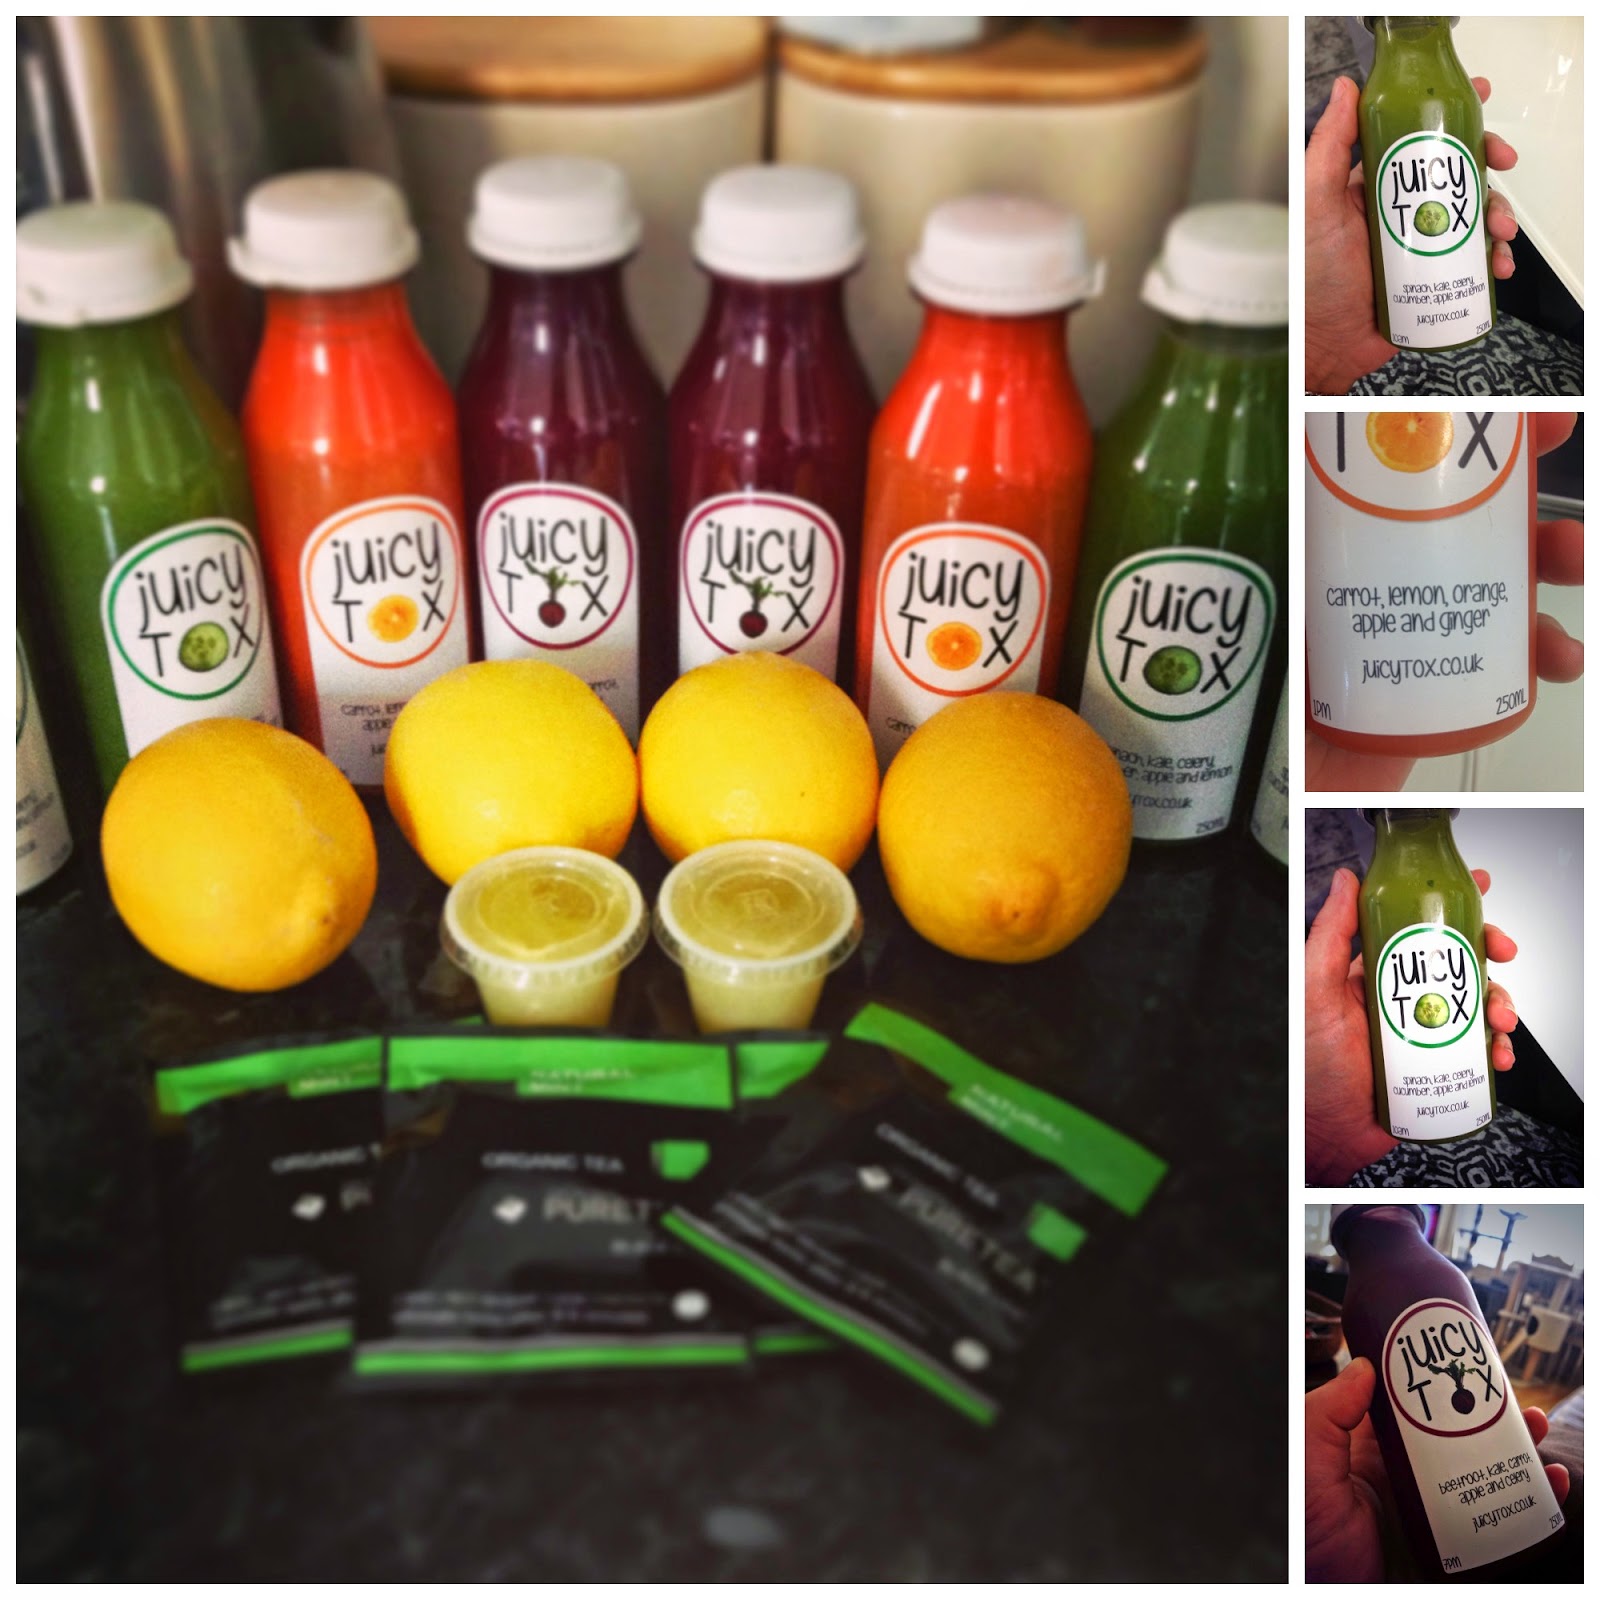 FOOD | Juicy Tox 4 Day Juice Cleanse – Review